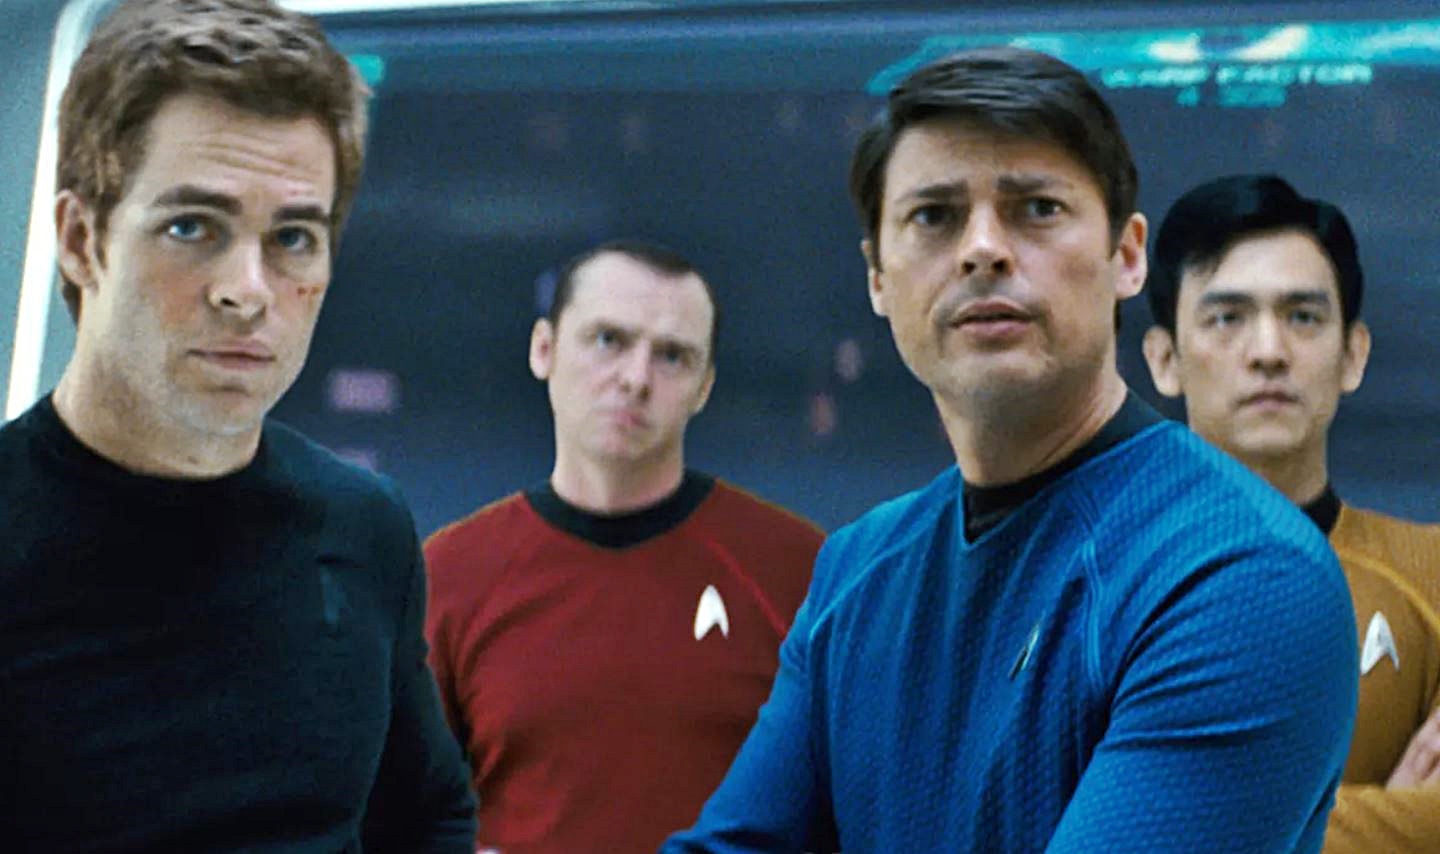 Star Trek 4 Loses Release Date After Director Exit